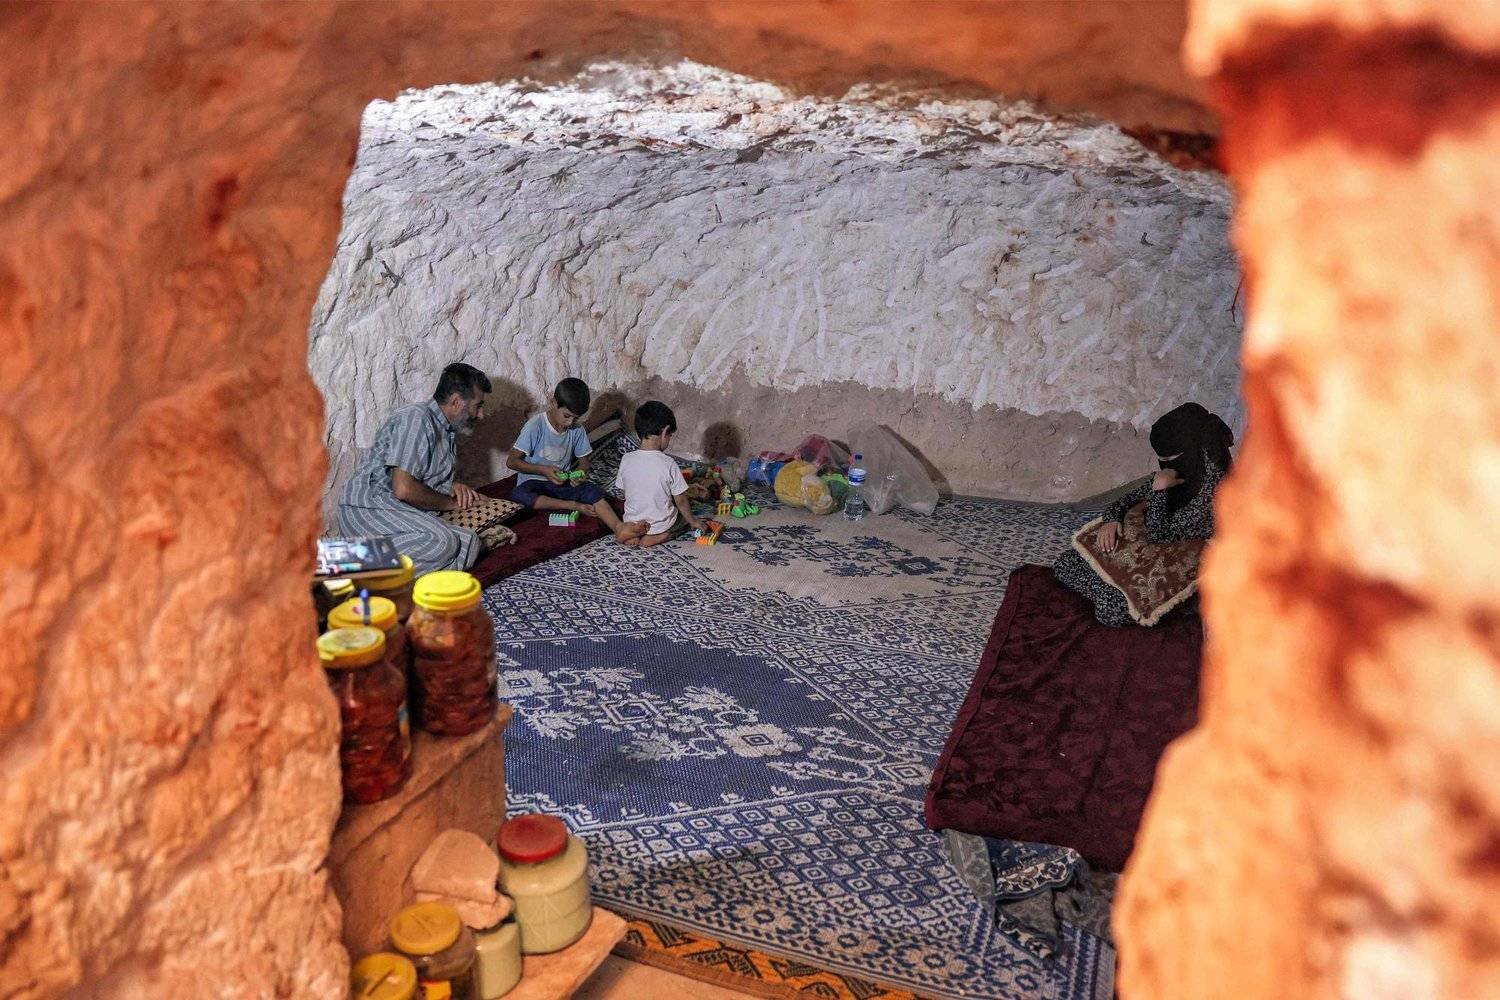 Ahmad Khalil, 53, sits with his family in a cave he carved manually with his children in five years, near his original home in the mostly abandoned village of Kansafra, on September 10, 2023. (Photo by Omar HAJ KADOUR / AFP)